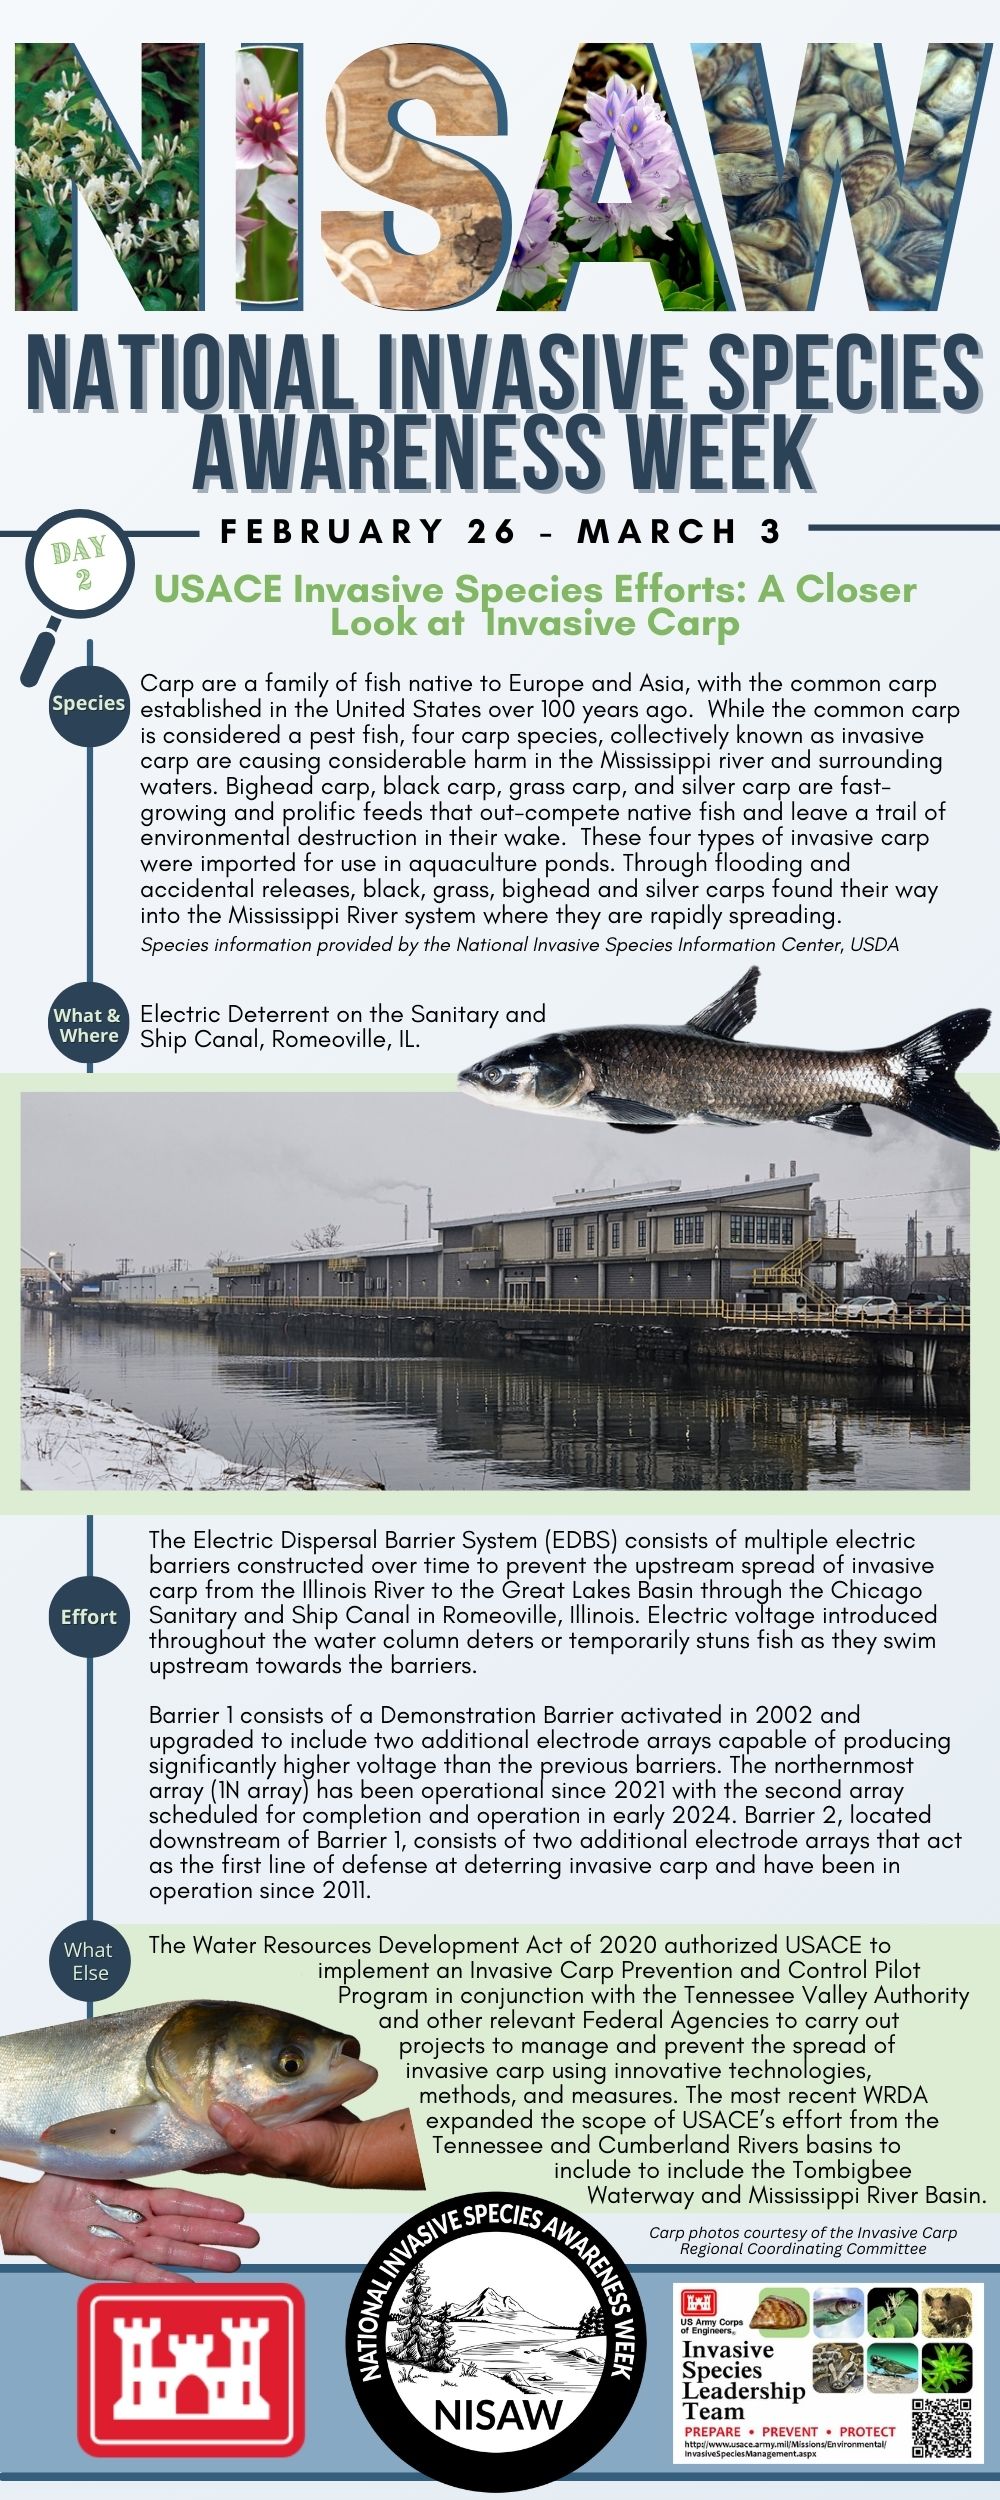 Bookmark for Day 2 of National Invasive Species Awareness Week, highlighting the USACE invasive species efforts related to invasive carp